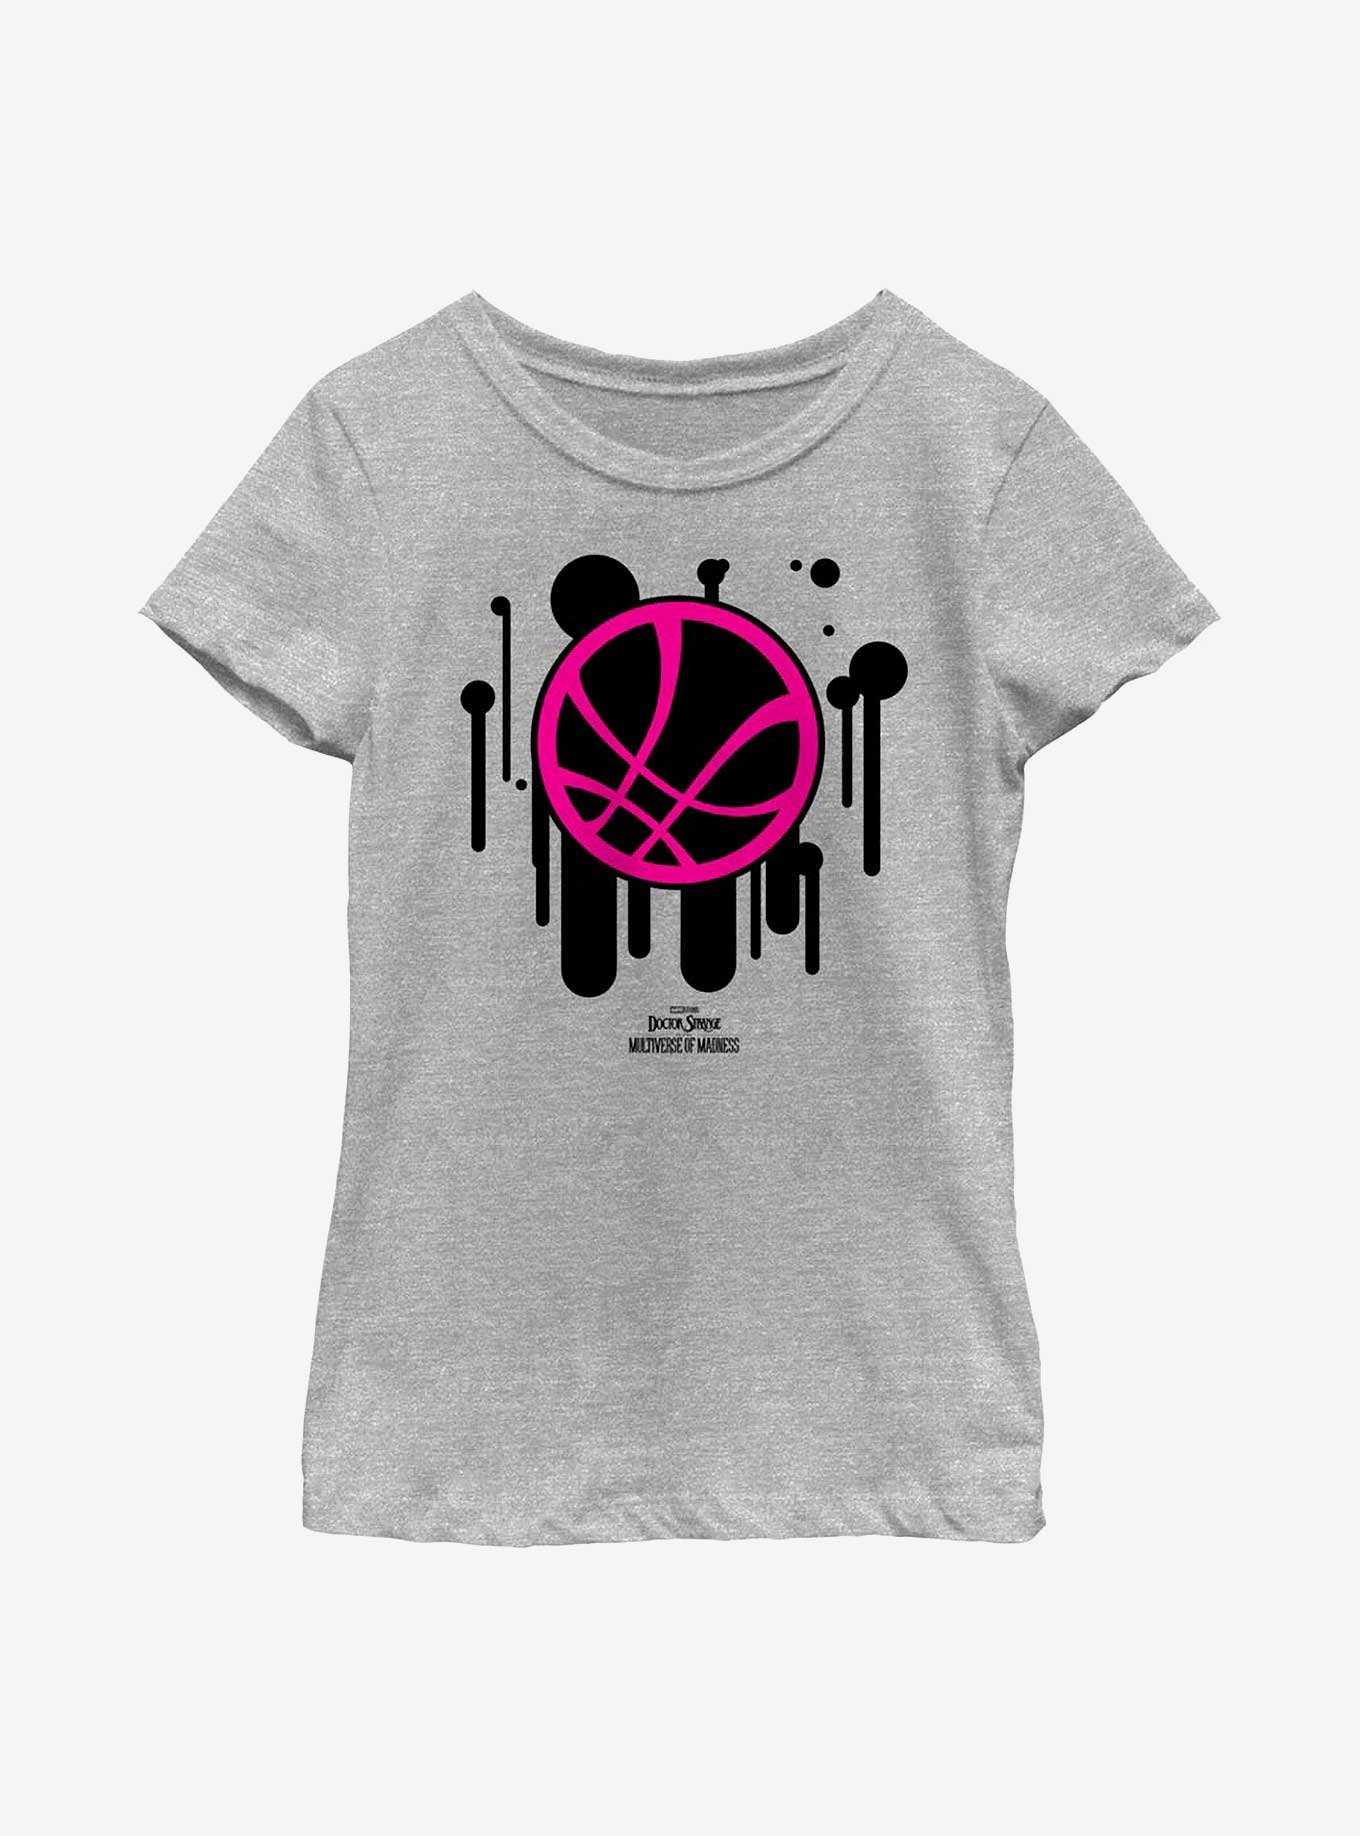 Marvel Doctor Strange In The Multiverse Of Madness Graffiti Drip Seal Youth Girls T-Shirt, , hi-res